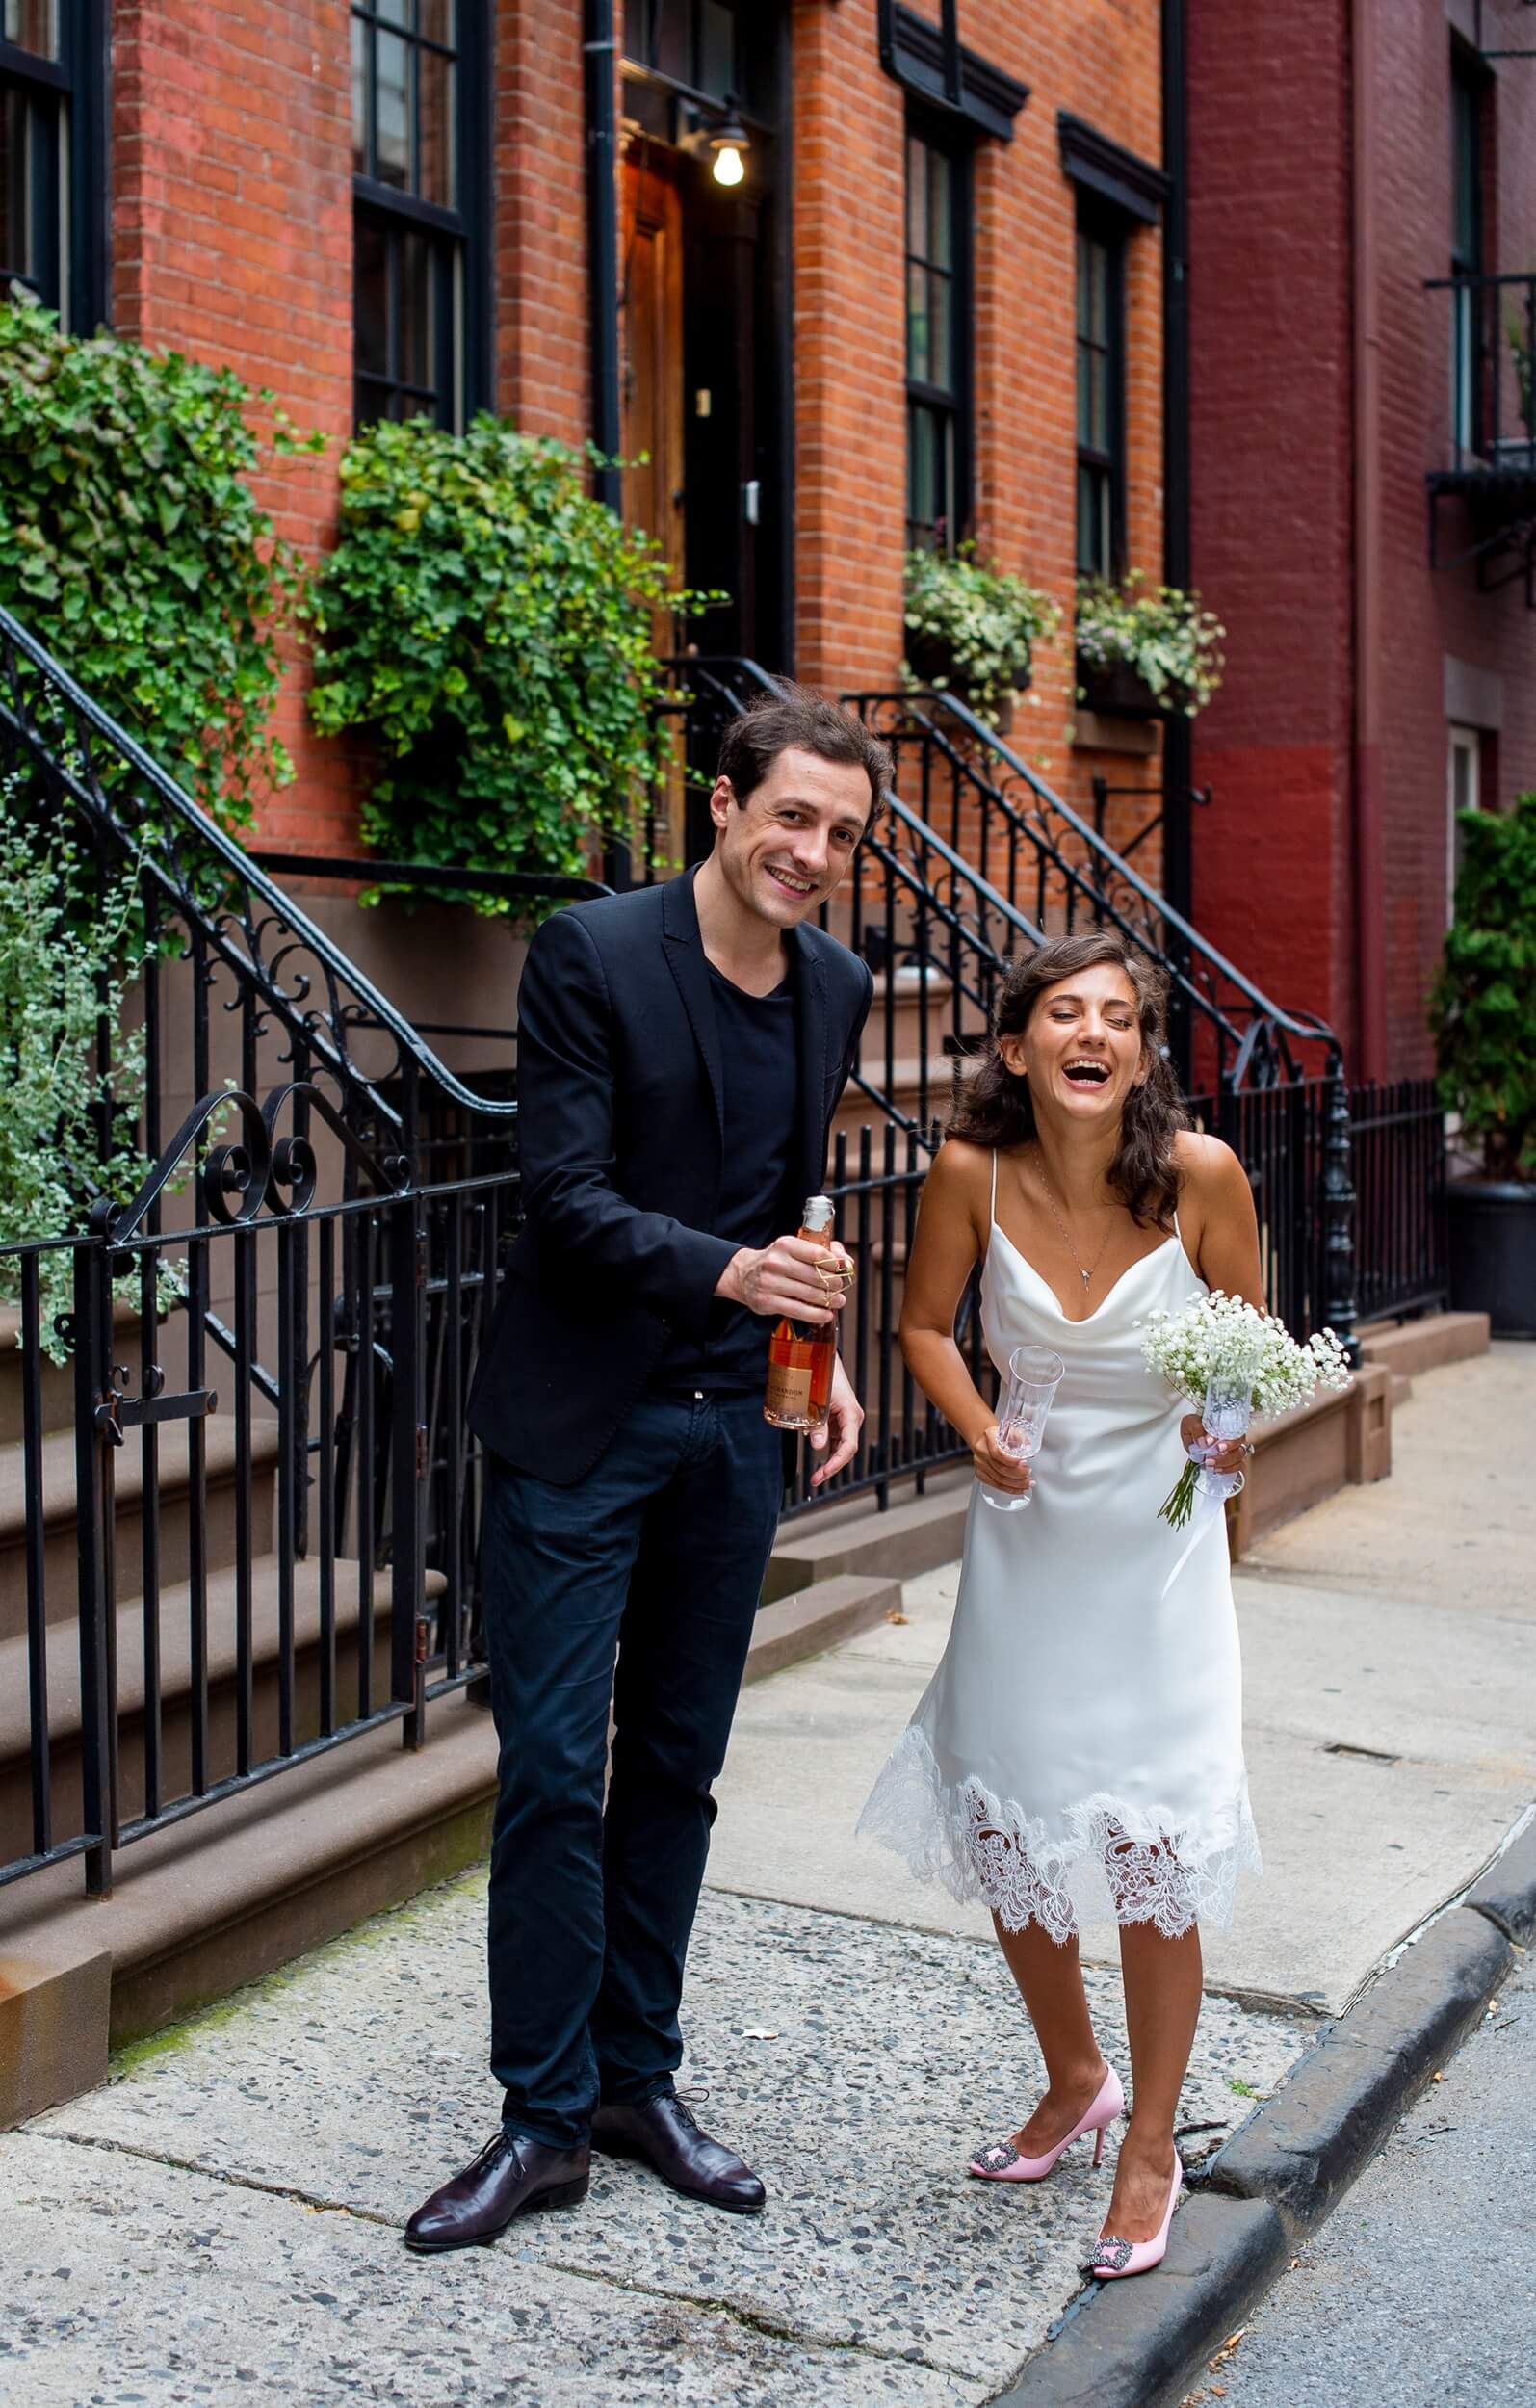 NYC Elopement Photographer | Elope to New York!